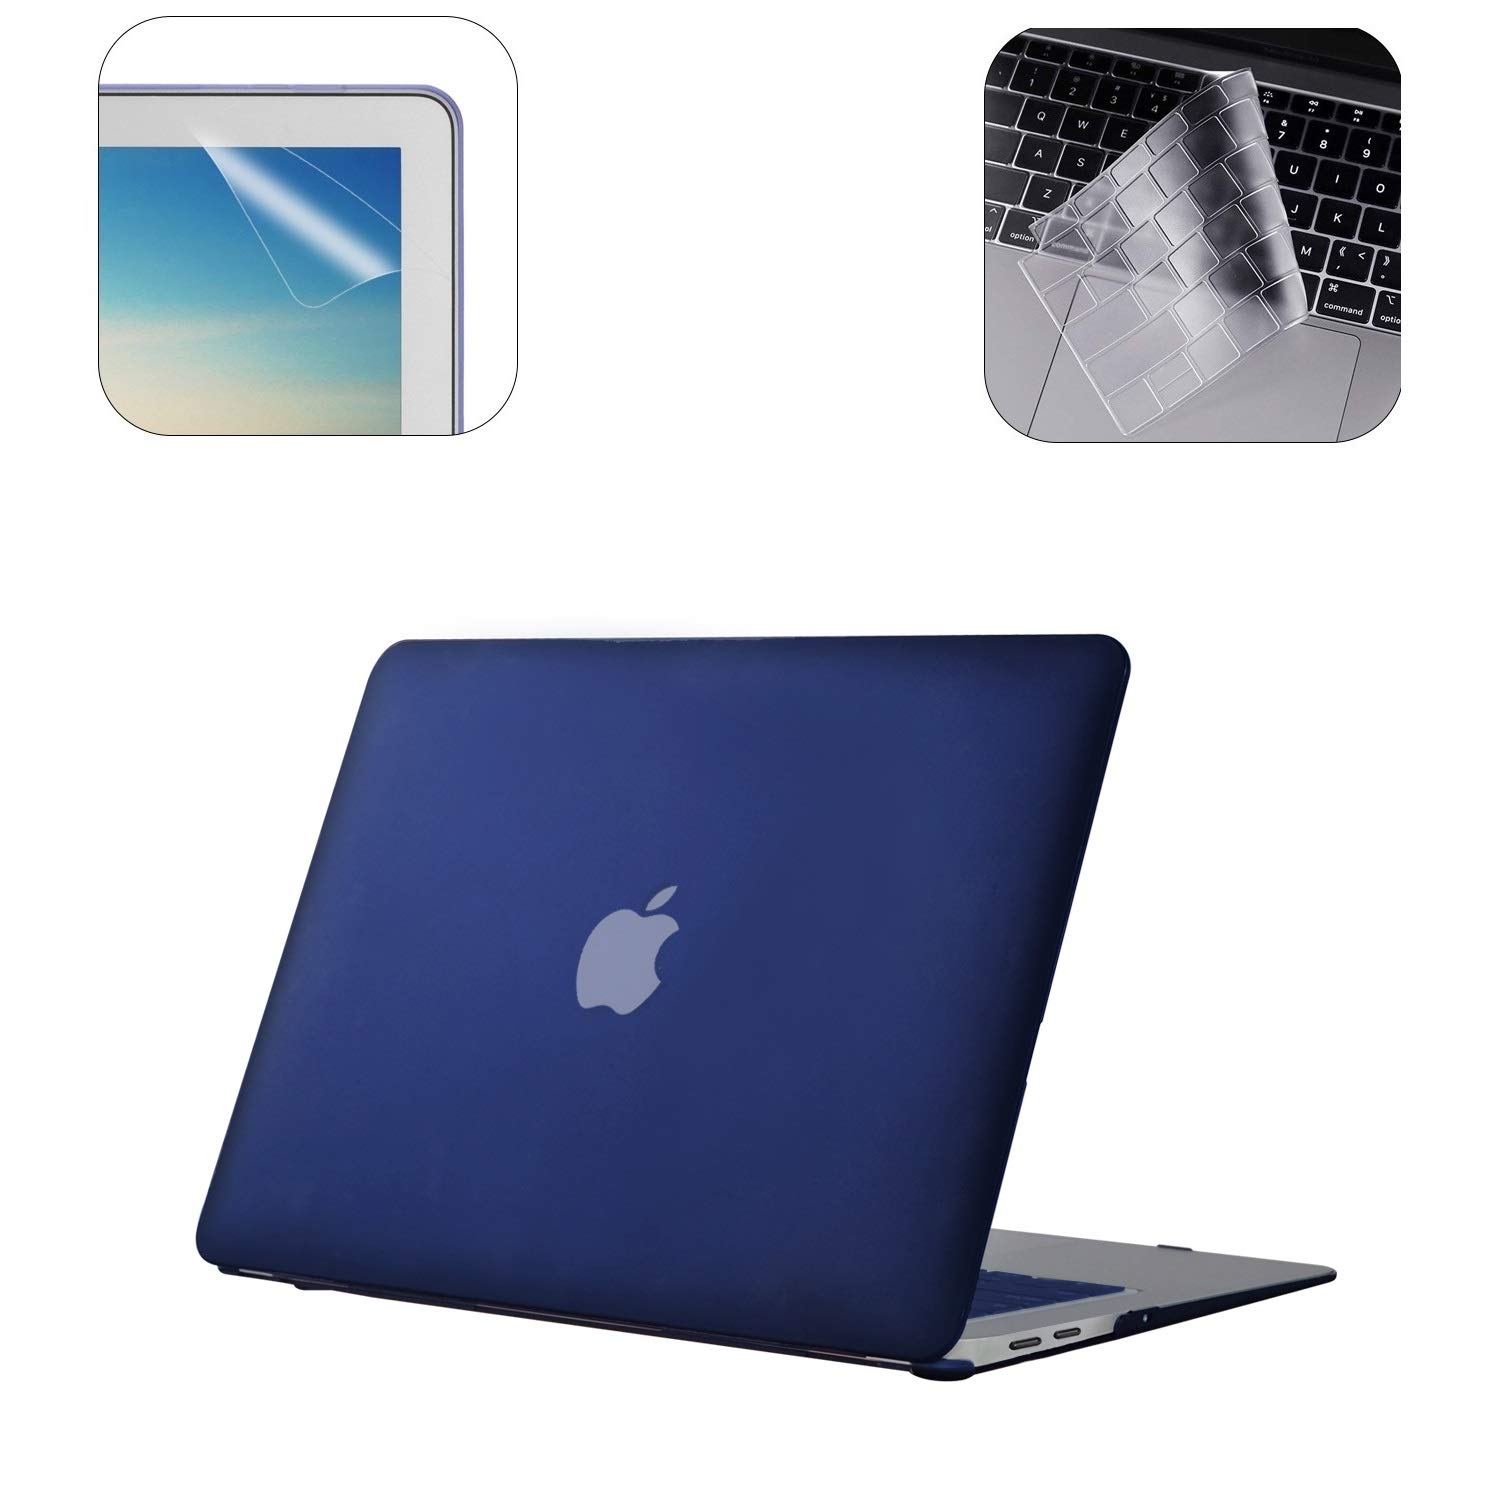 buy macbook pro with dvd drive